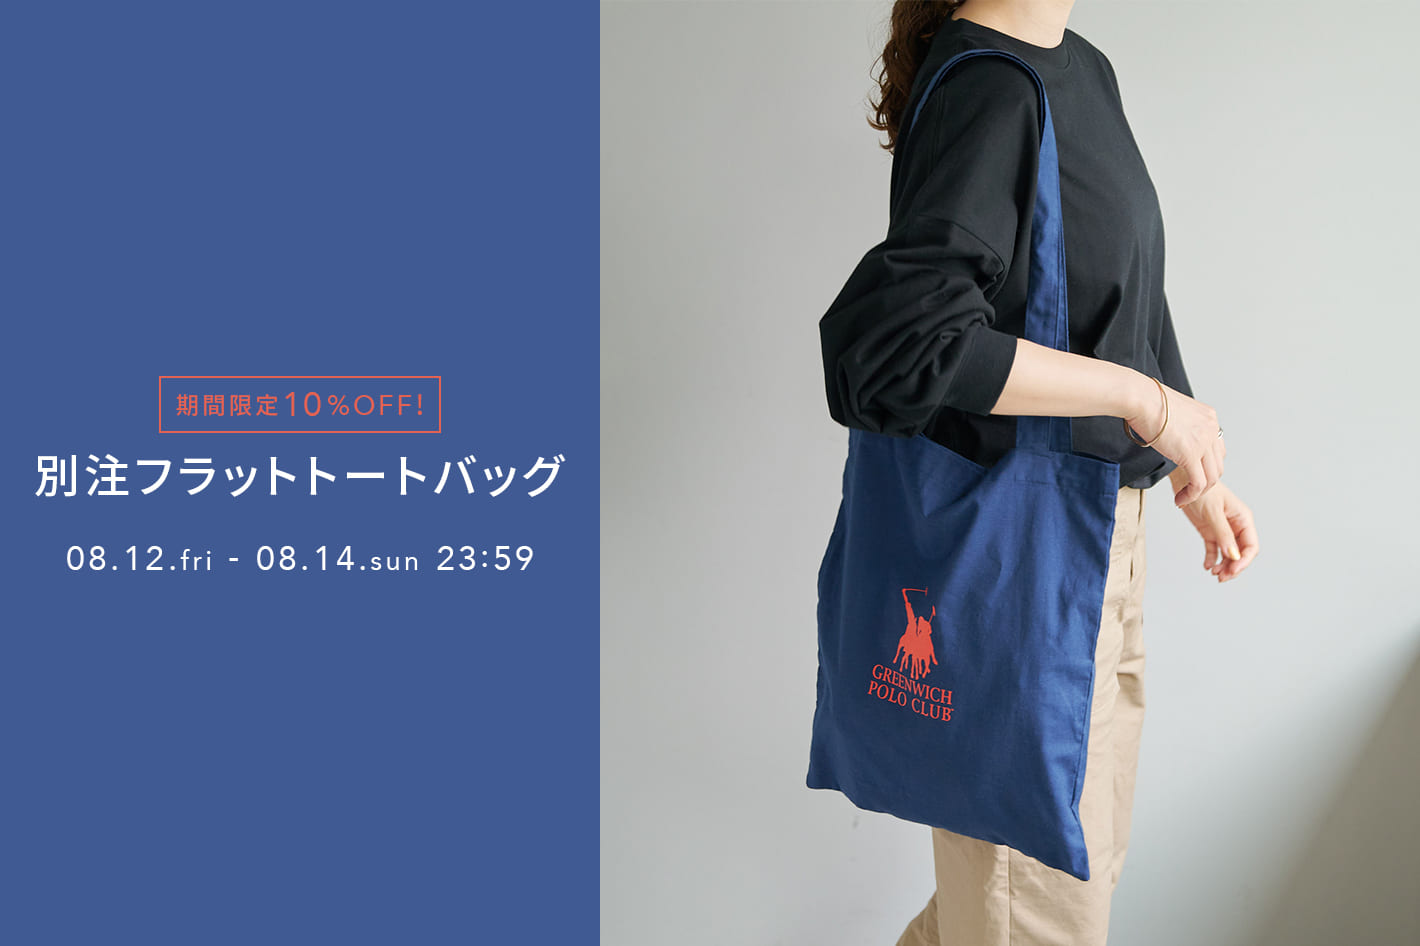 Daily russet ◆期間限定◆別注フラットトートバッグが10％OFF！